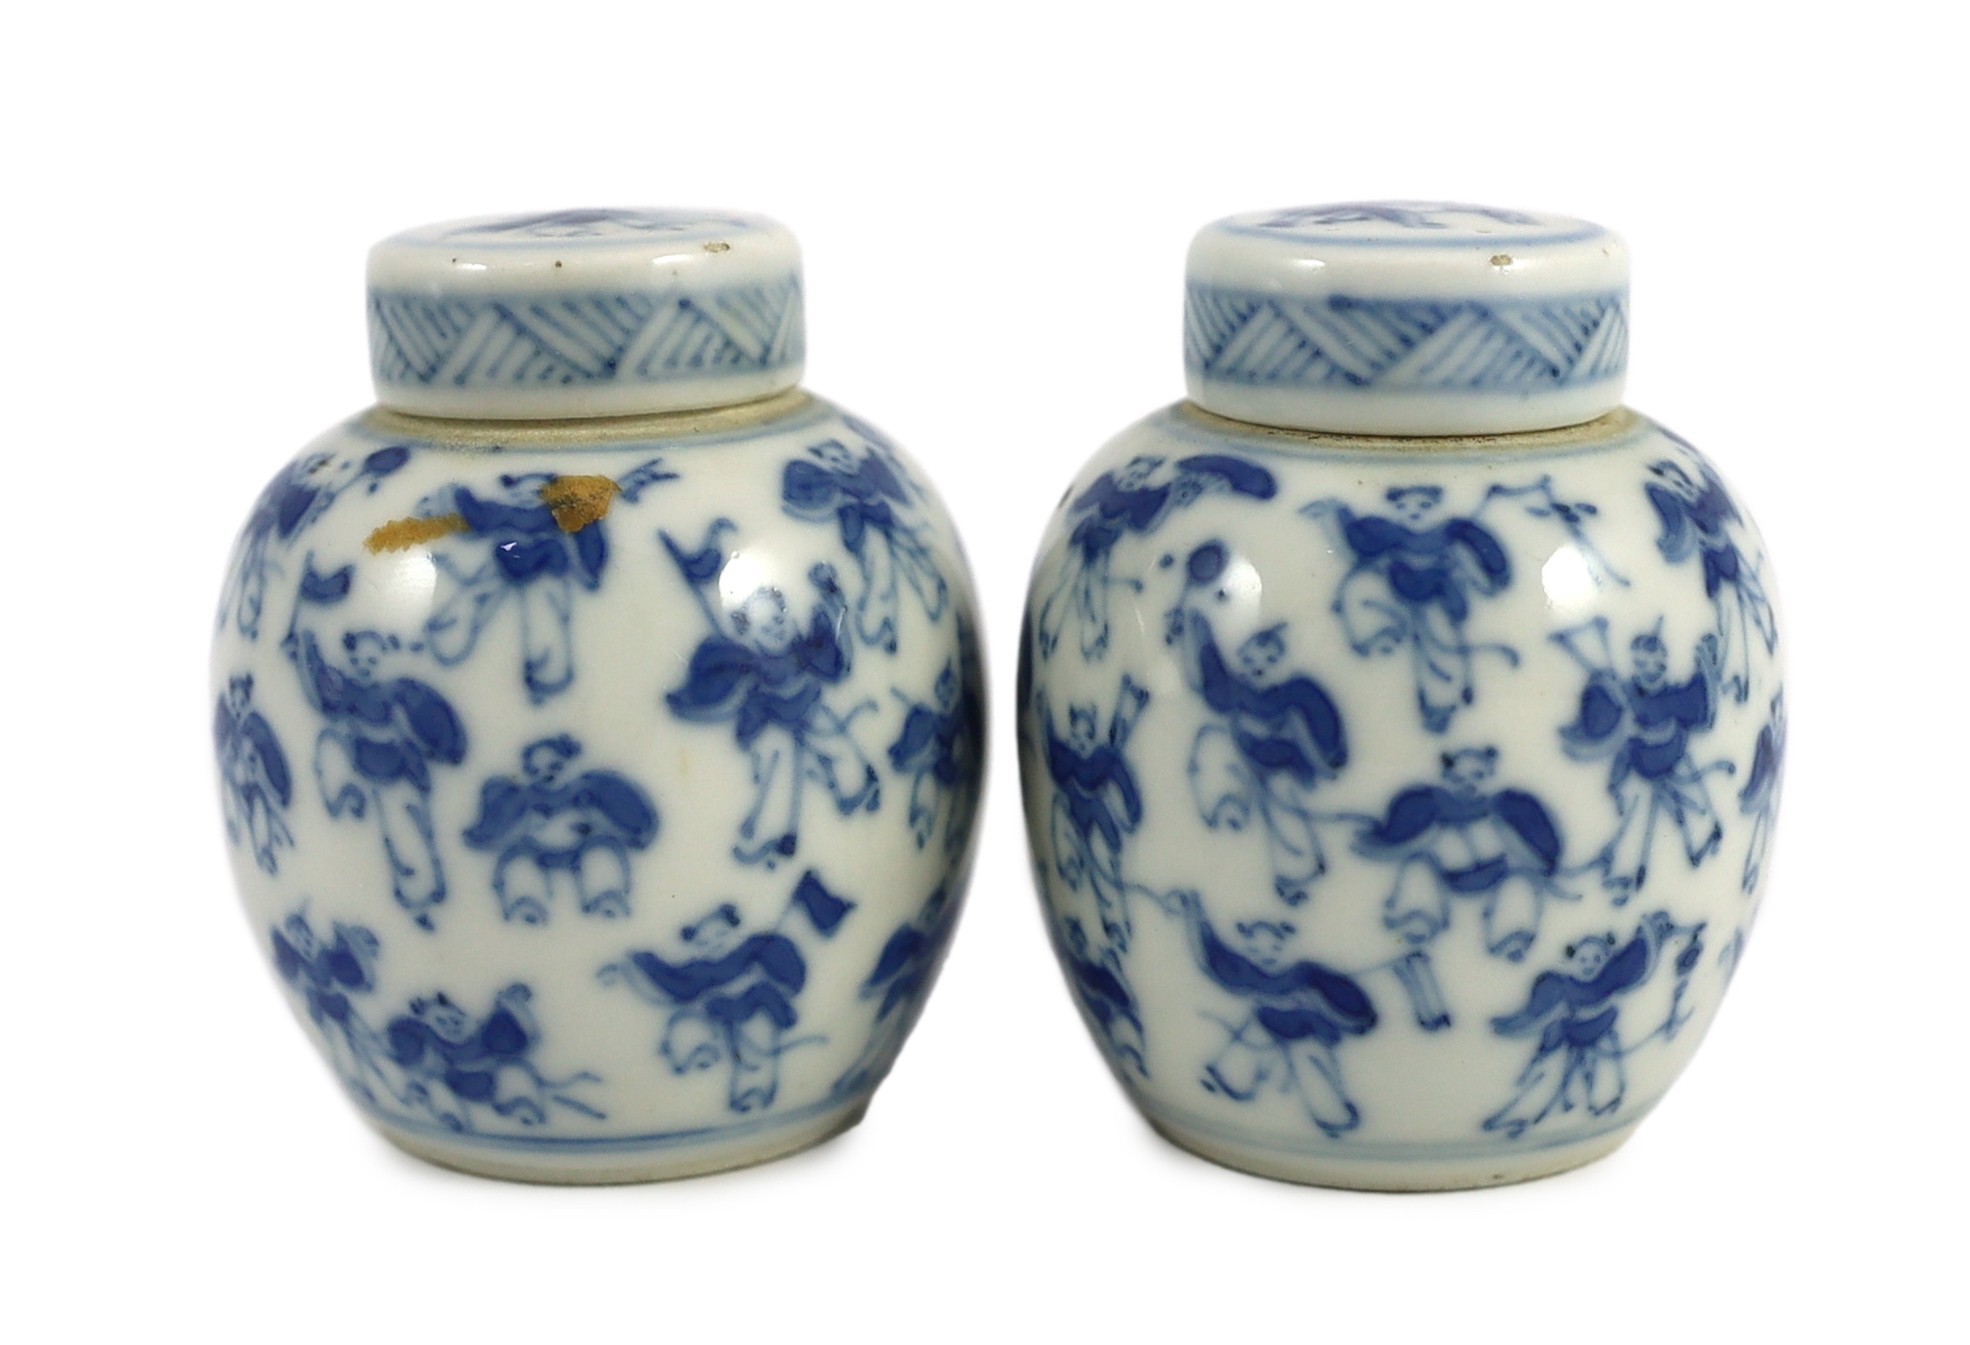 A pair of 19th century Chinese blue and white boys miniature jars and covers, 5.5 cm high